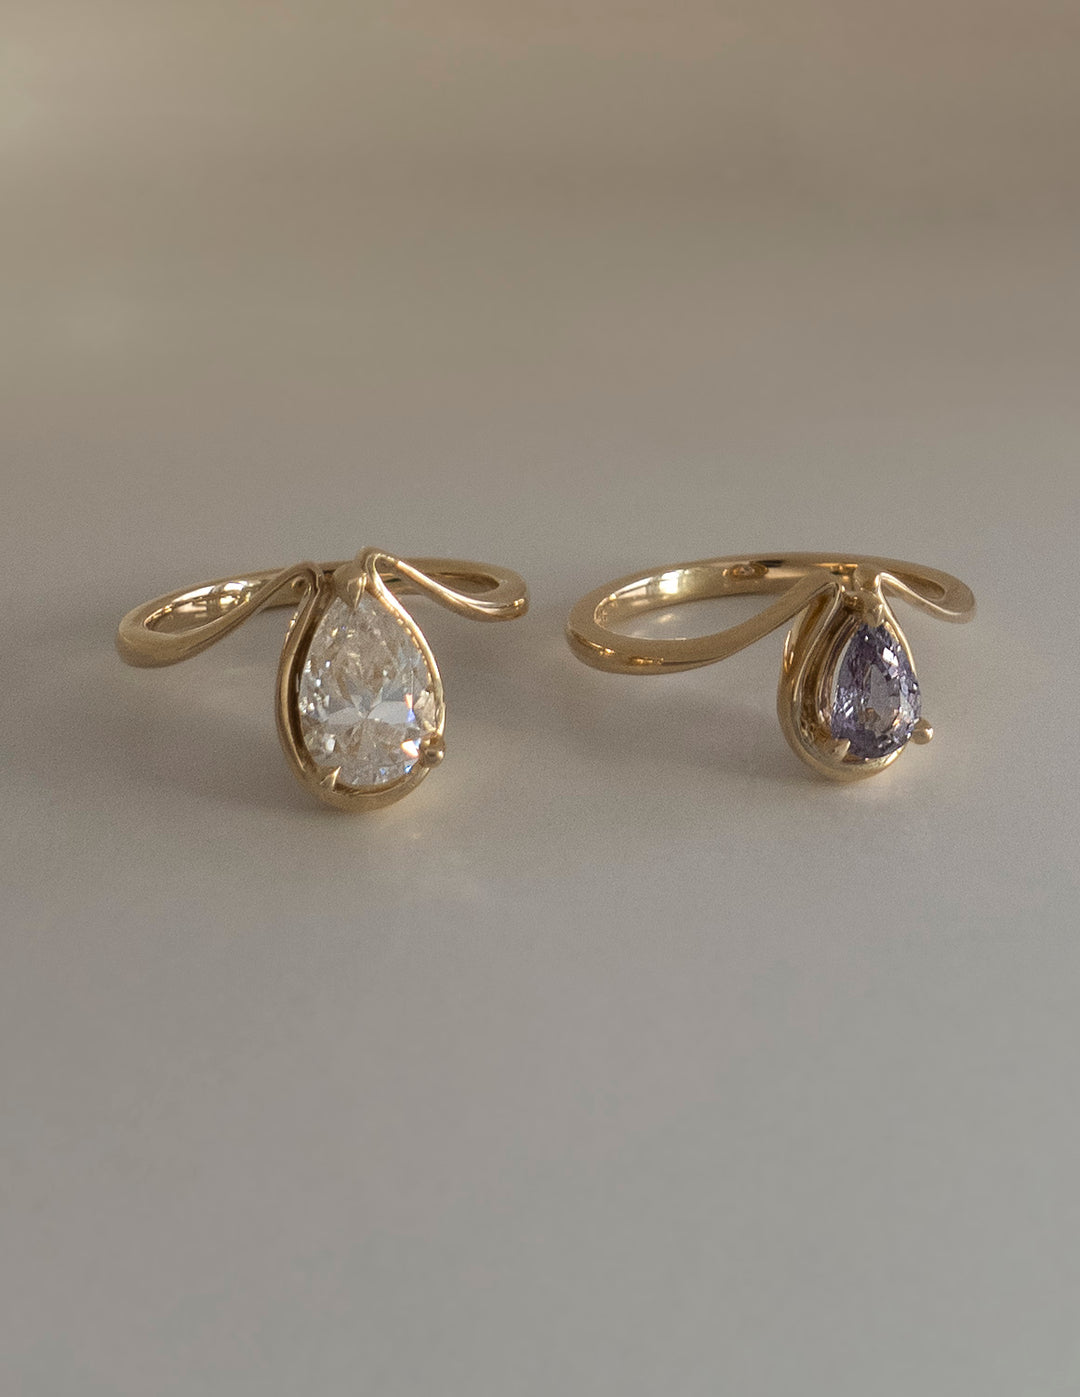 One-of-a-kind — Talia Ring with Lavender Sapphire